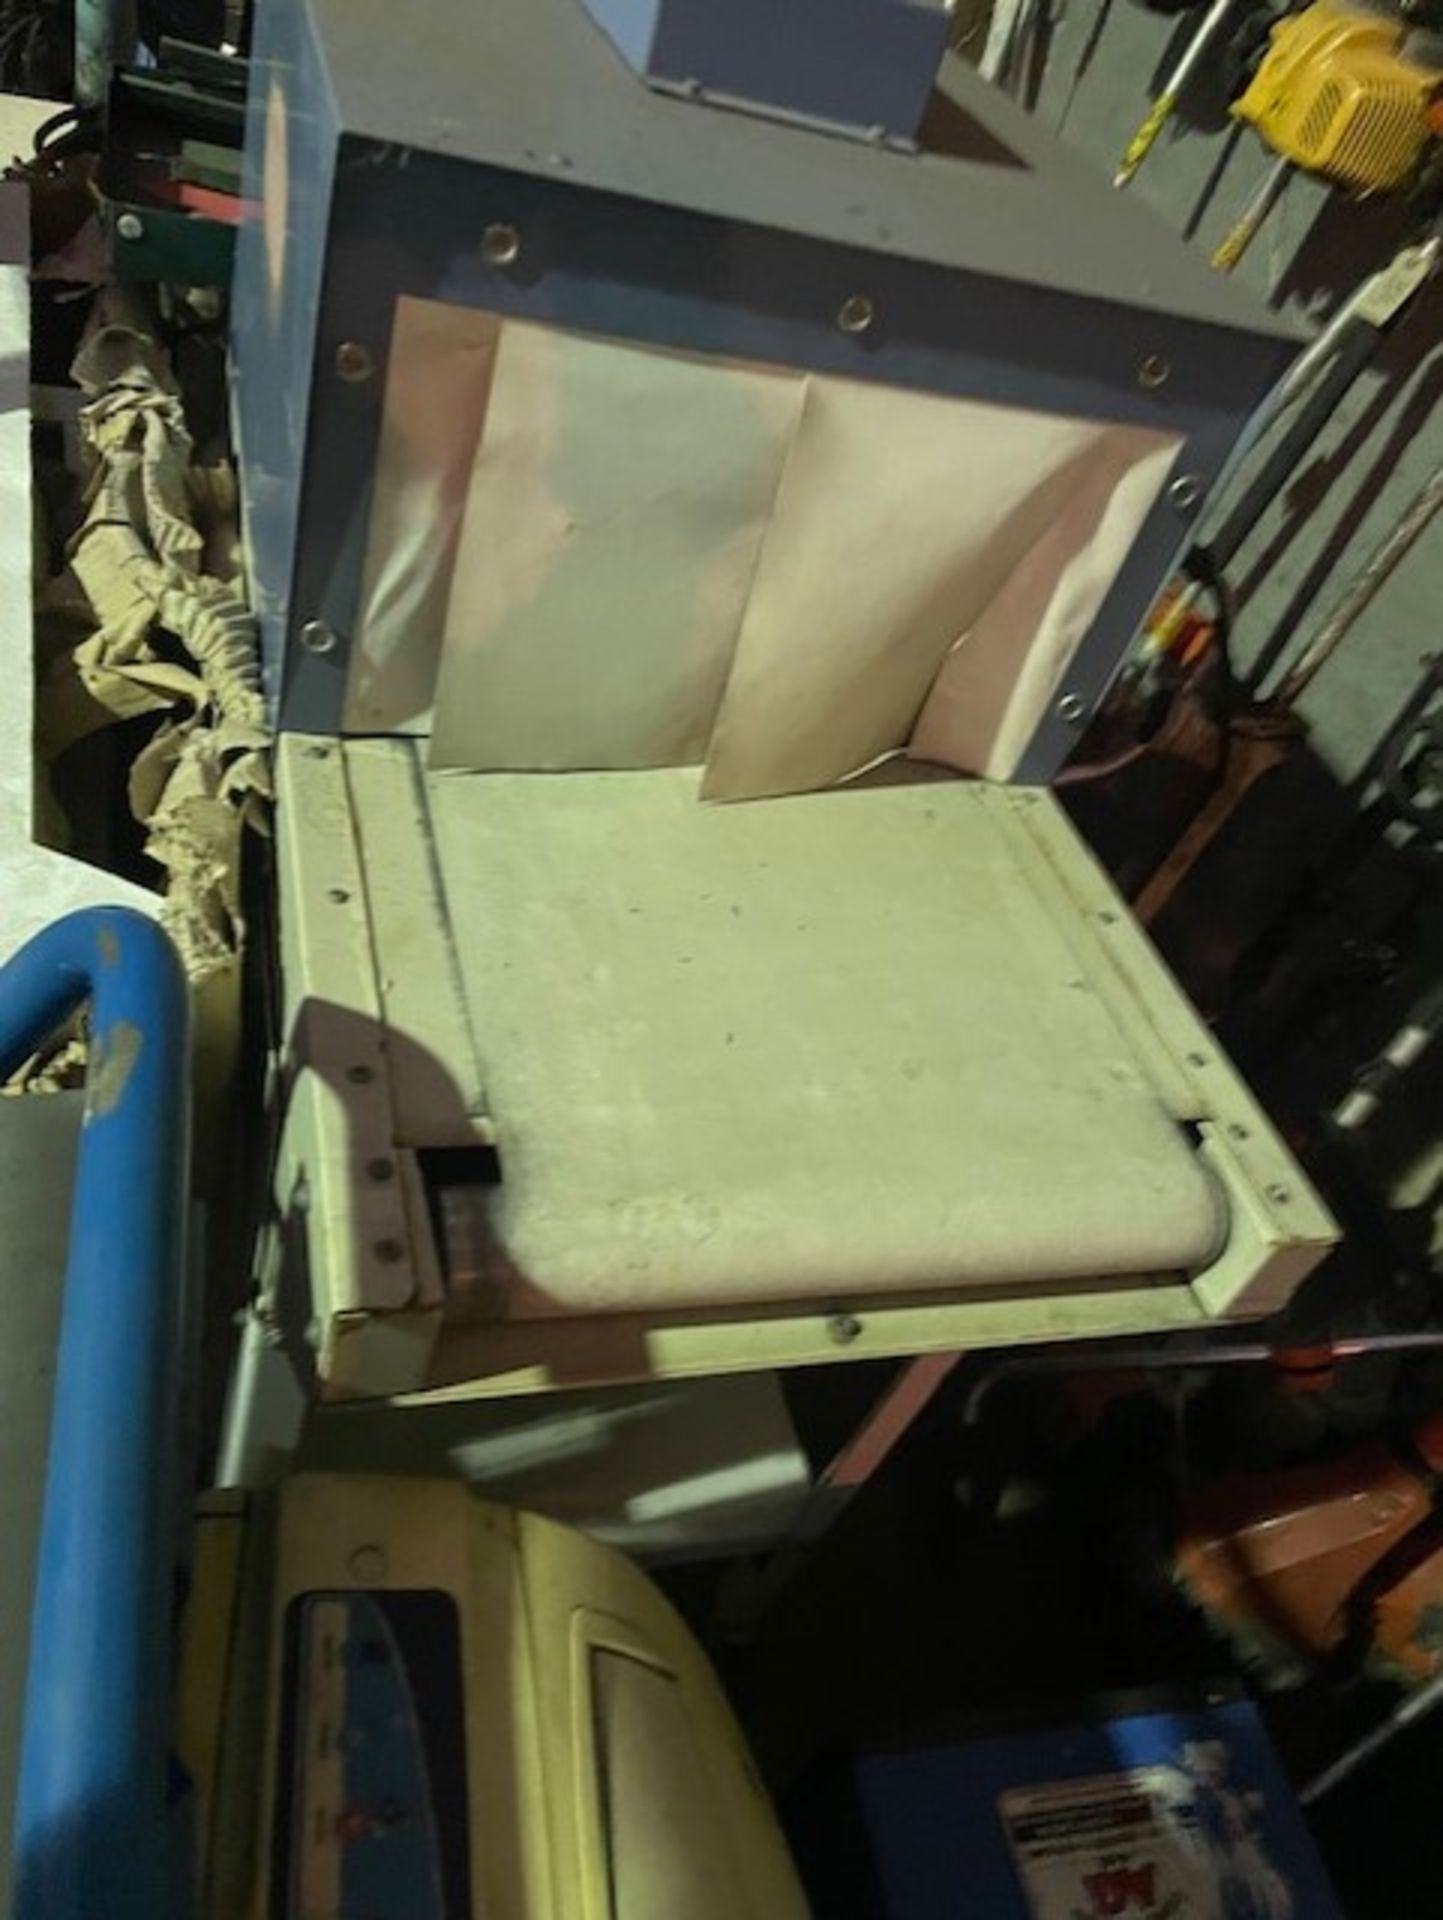 Heat sealing machine for sealing bags along with elevator for moving package on has been sat around - Image 4 of 6